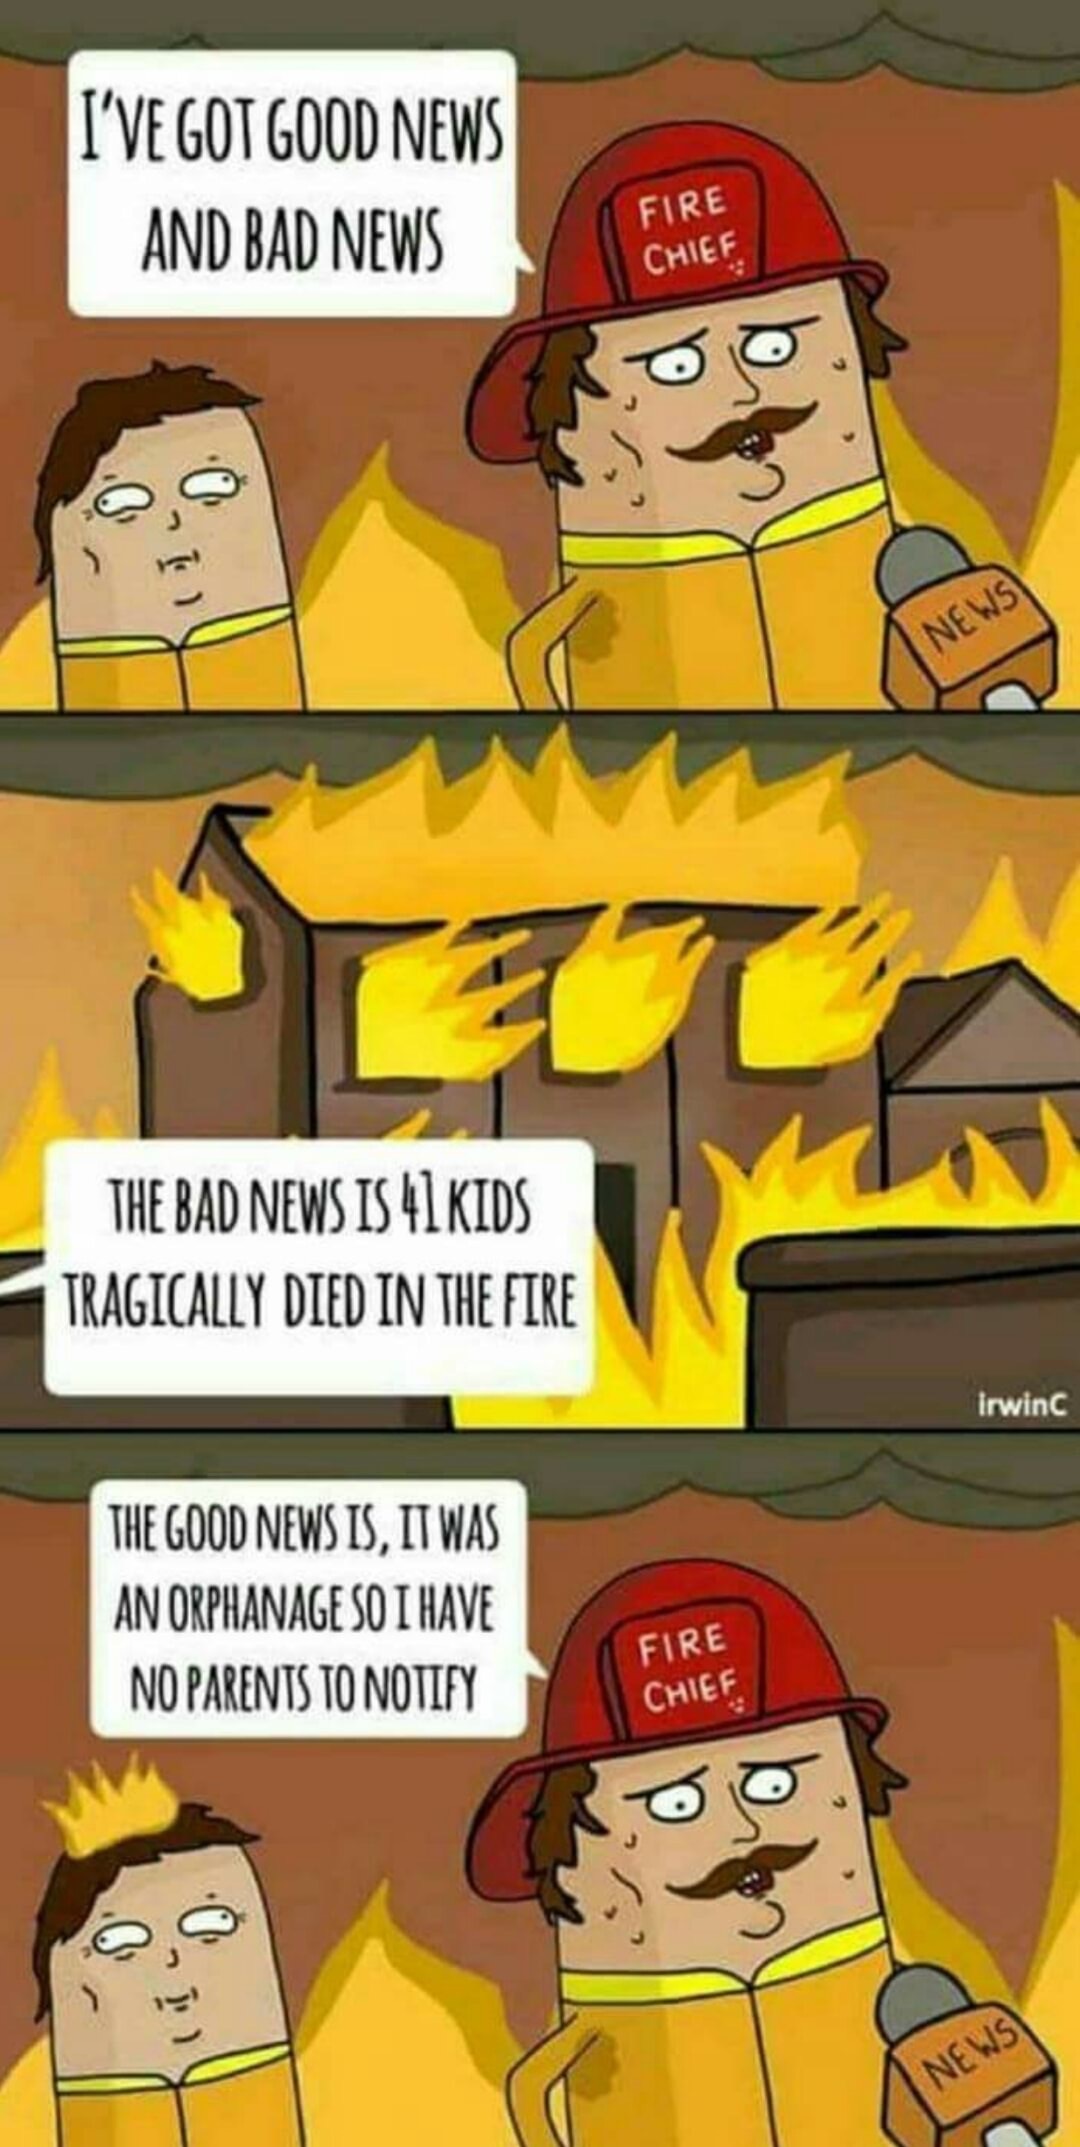 offensive comics that will make you feel guilty for laughing - I'Ve Got Good News And Bad News Fire Chief News The Bad News Is 41 Kids Tragically Died In The Fire Irwinc The Good News Is, It Was An Orphanage So I Have No Parents To Notify Fire Chief News